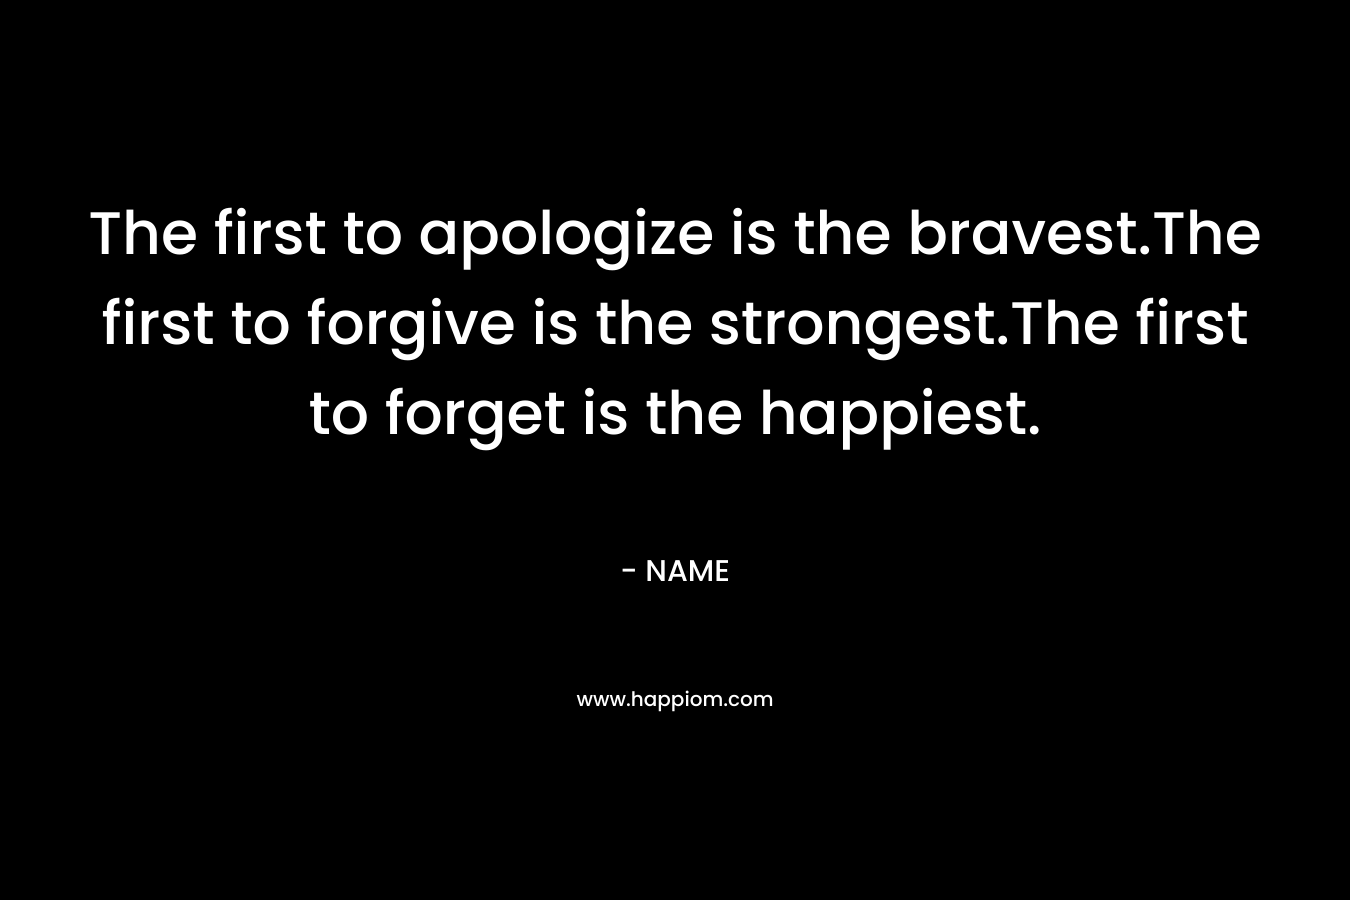 The first to apologize is the bravest.The first to forgive is the strongest.The first to forget is the happiest. – NAME